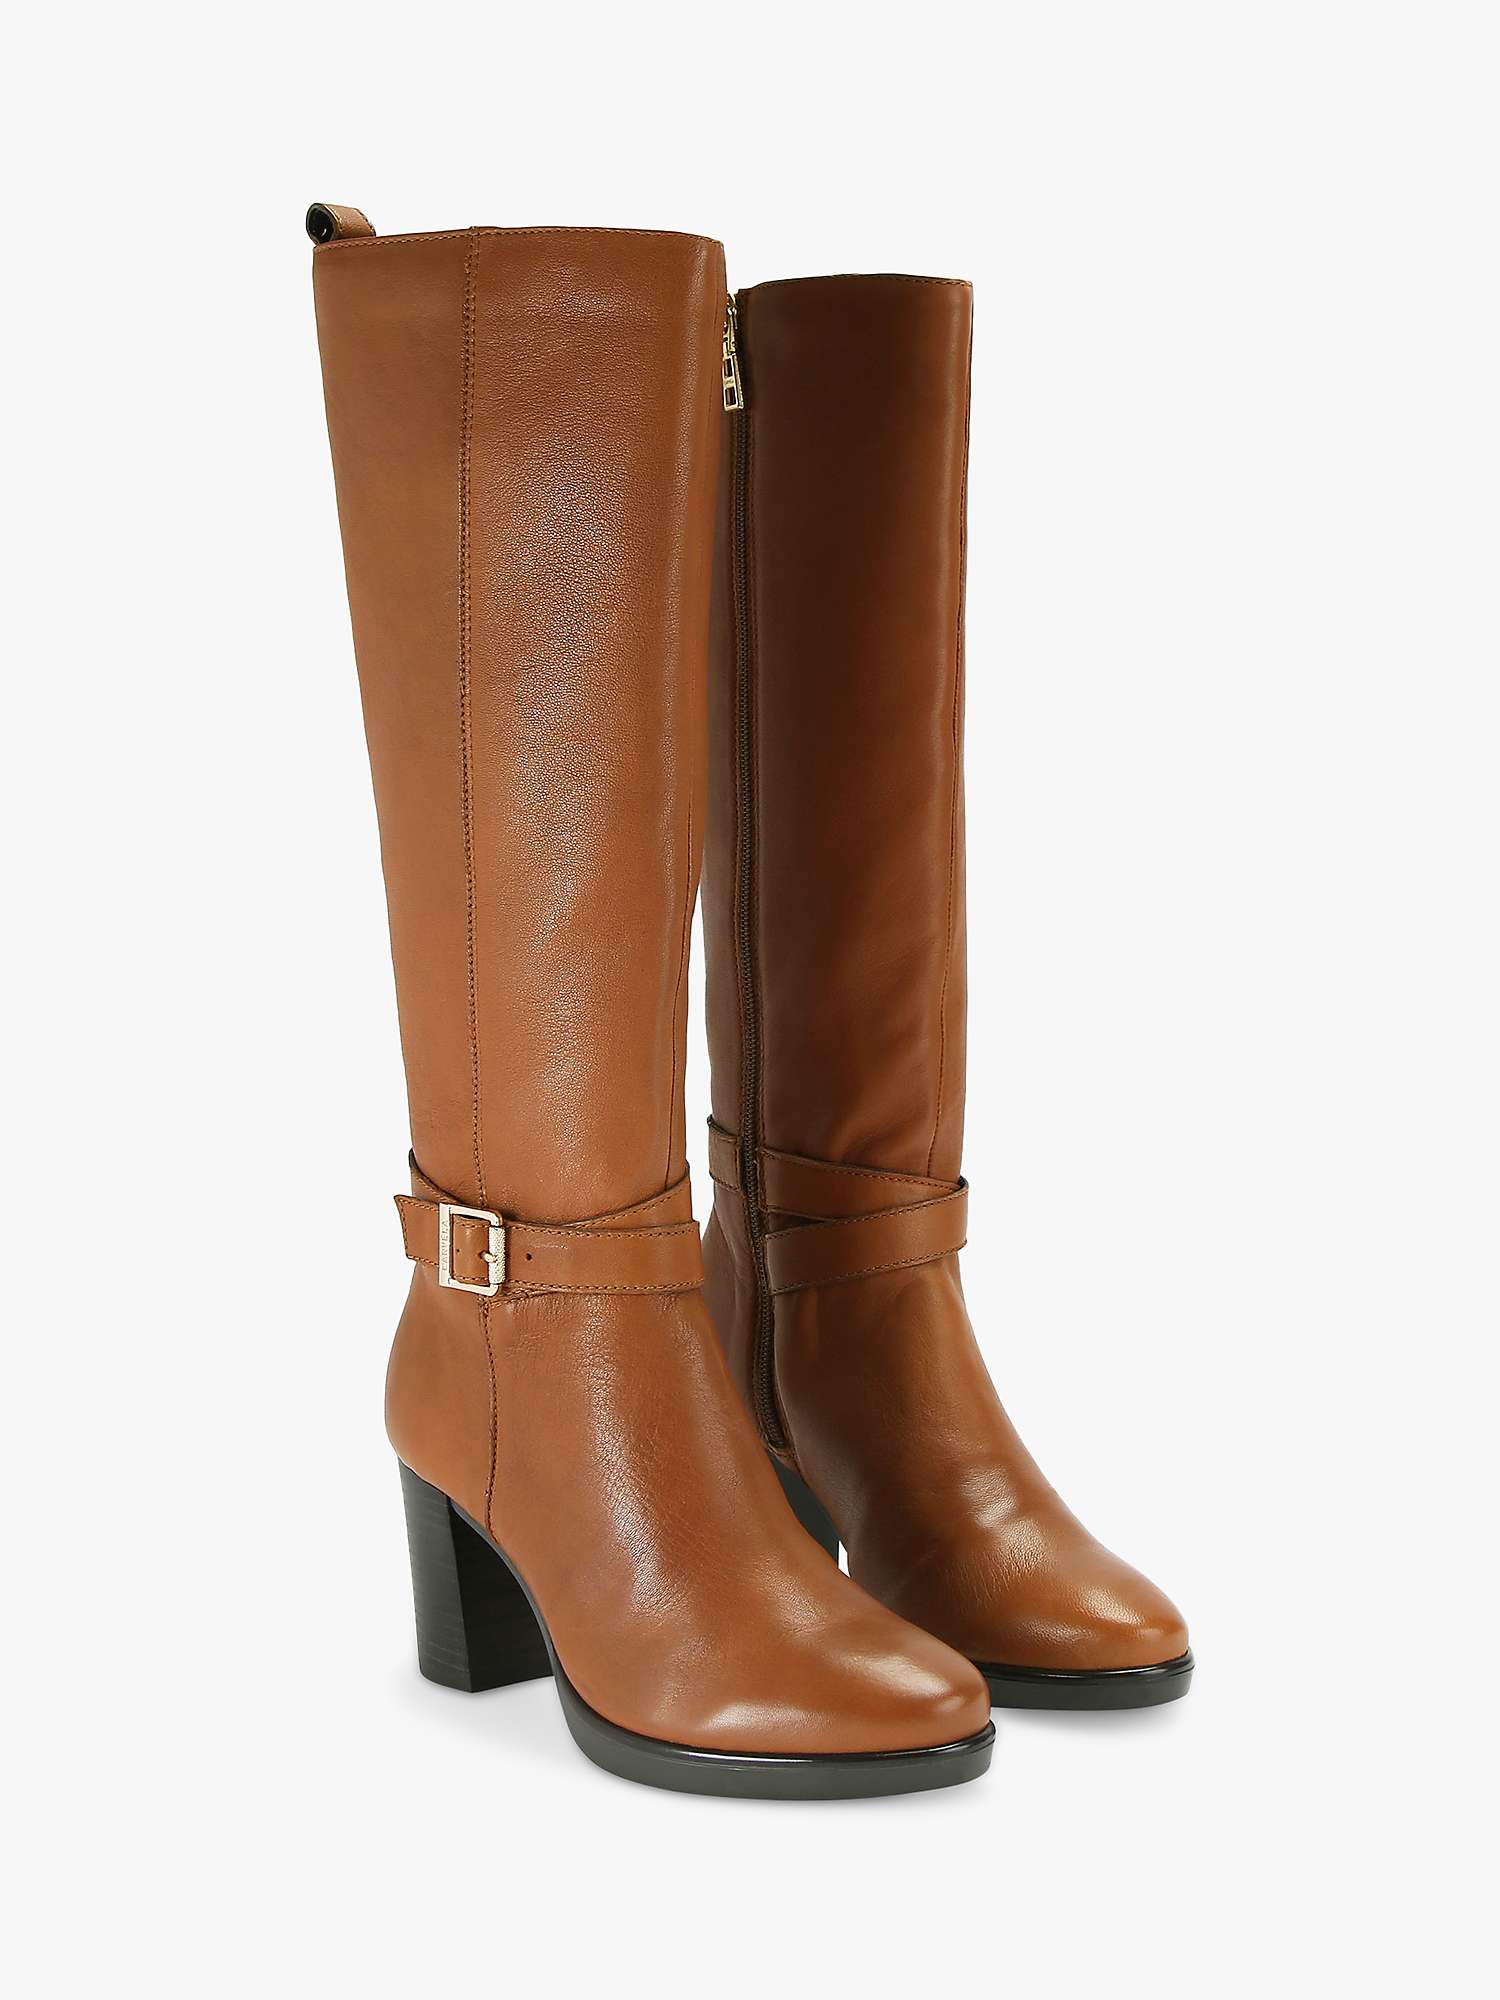 Buy Carvela Silver 2 Leather Knee High Boots, Brown Tan Online at johnlewis.com